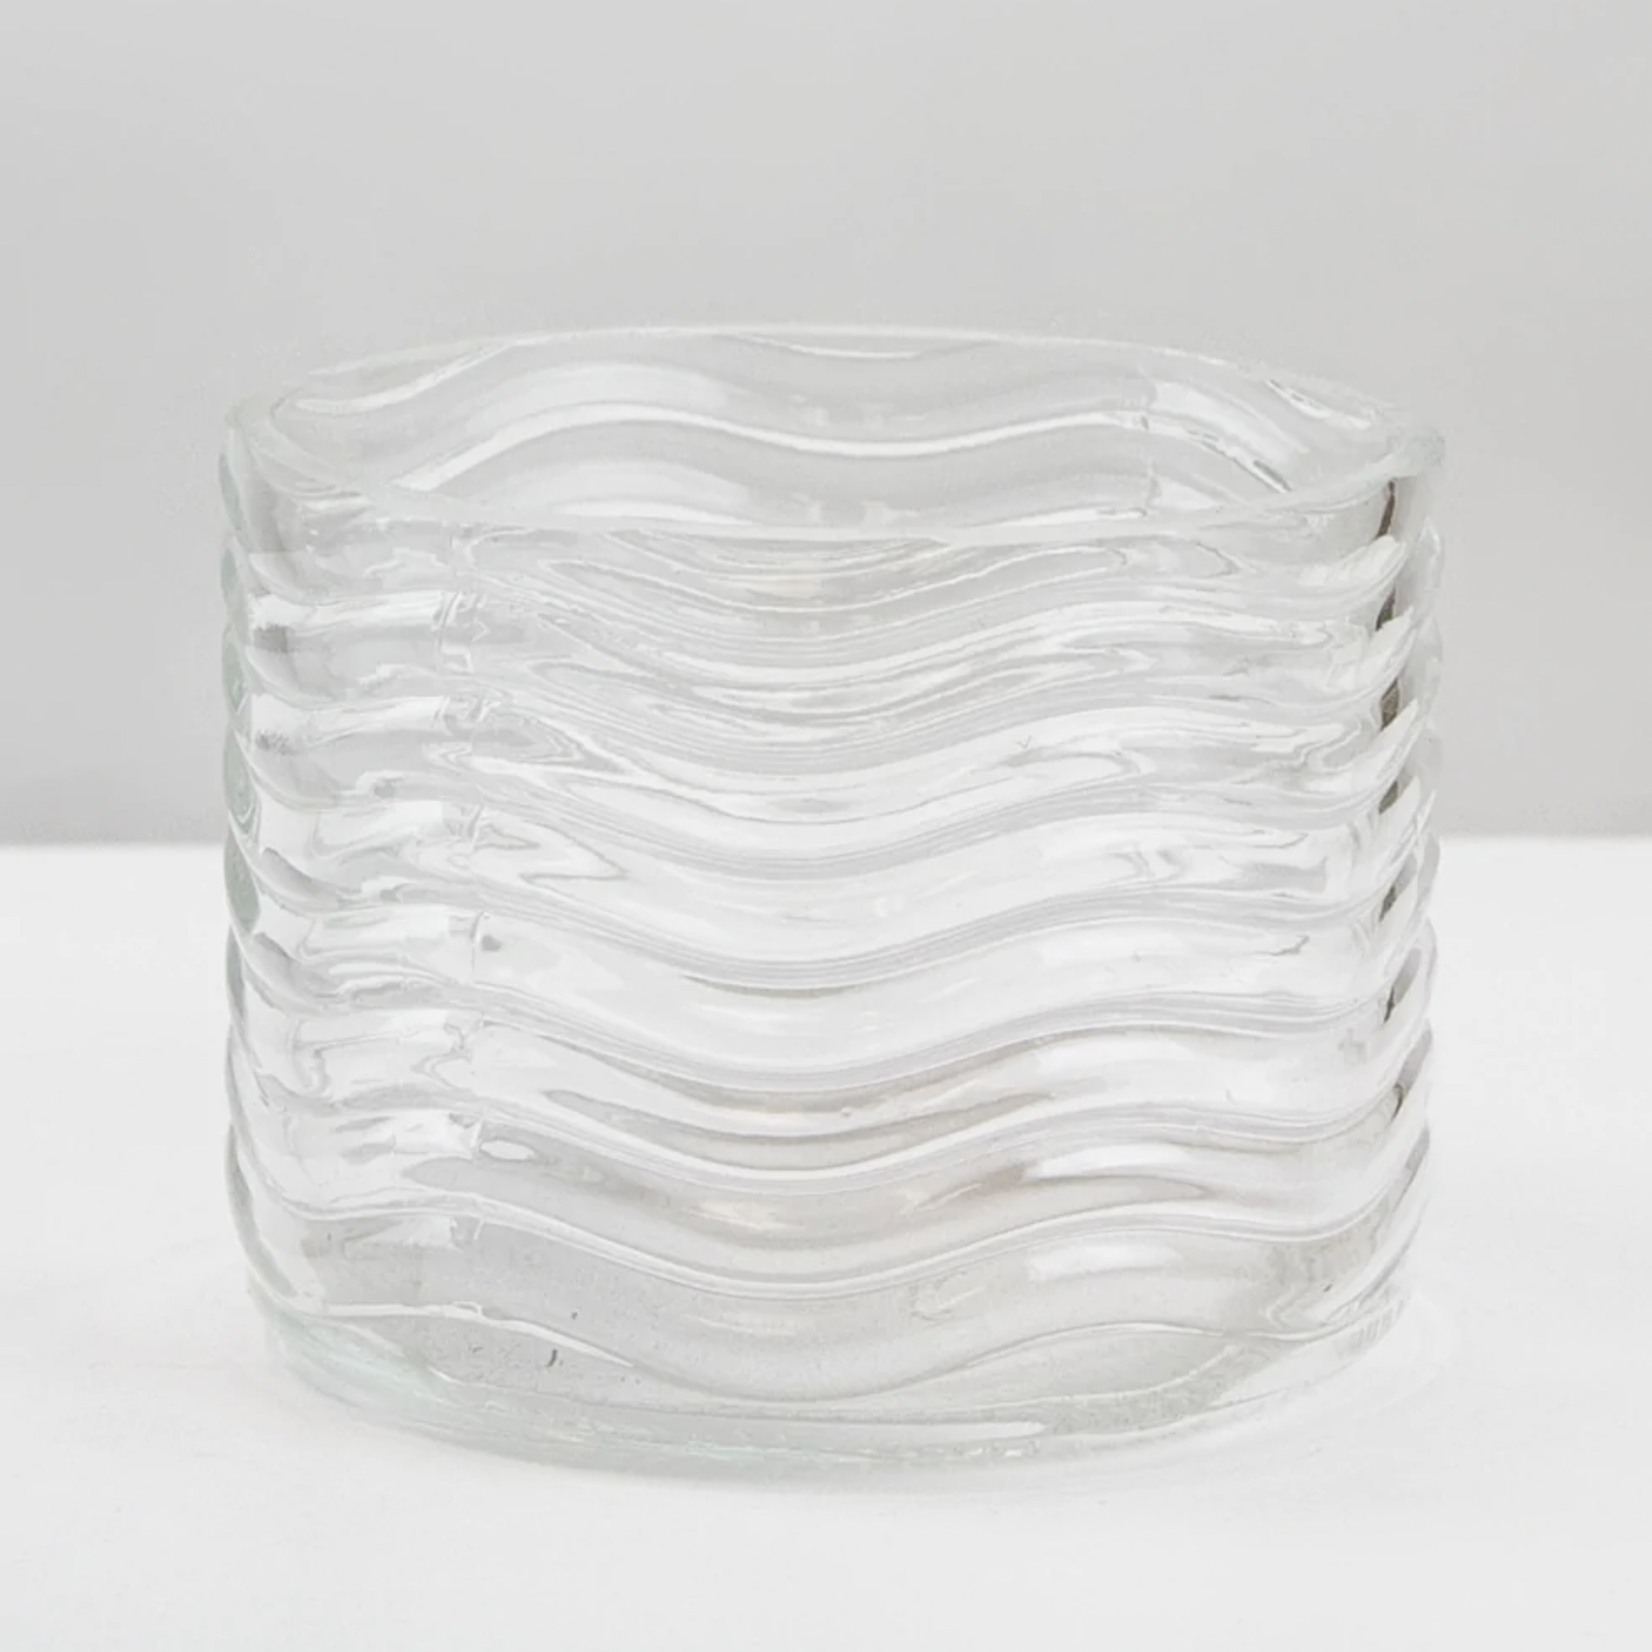 3.55”H X 4.35” CLEAR GLASS WAVE VASE CYLINDERS